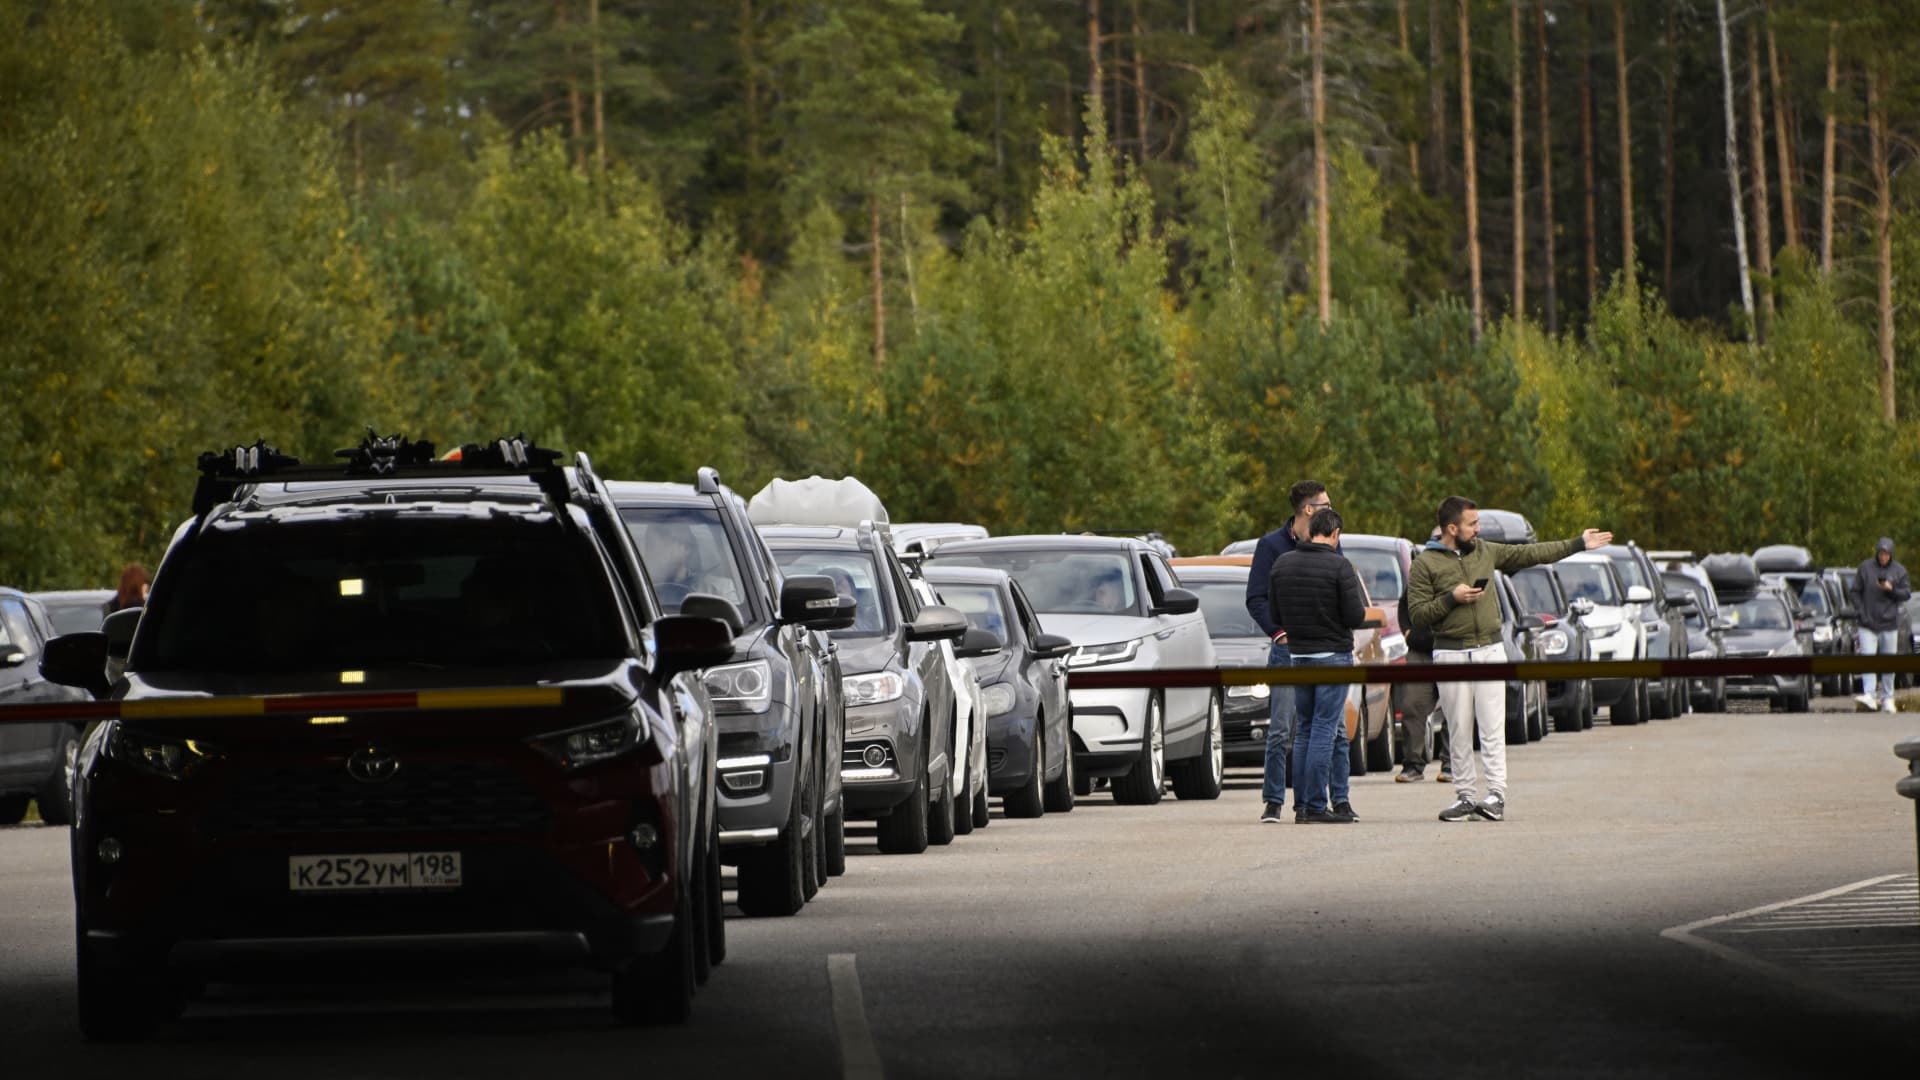 Cars coming from Russia wait in long lines at the border checkpoint between Russia and Finland near Vaalimaa, on September 22, 2022.